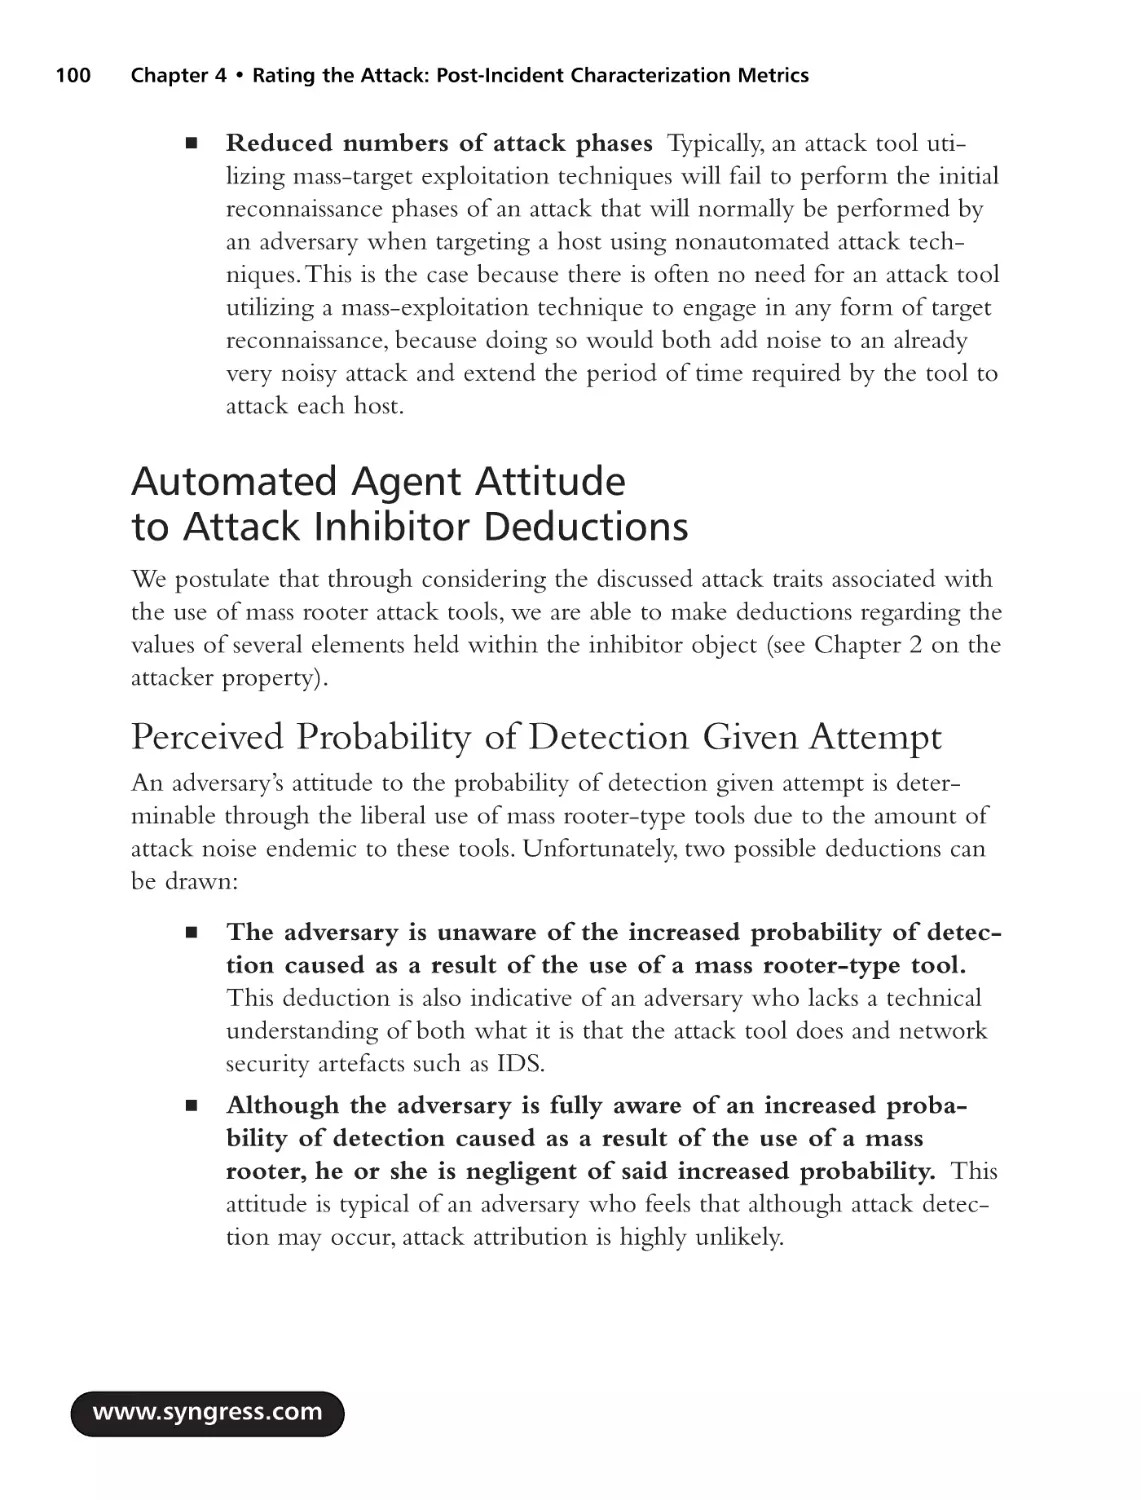 Automated Agent Attitude to Attack Inhibitor Deductions
Perceived Probability of Detection Given Attempt